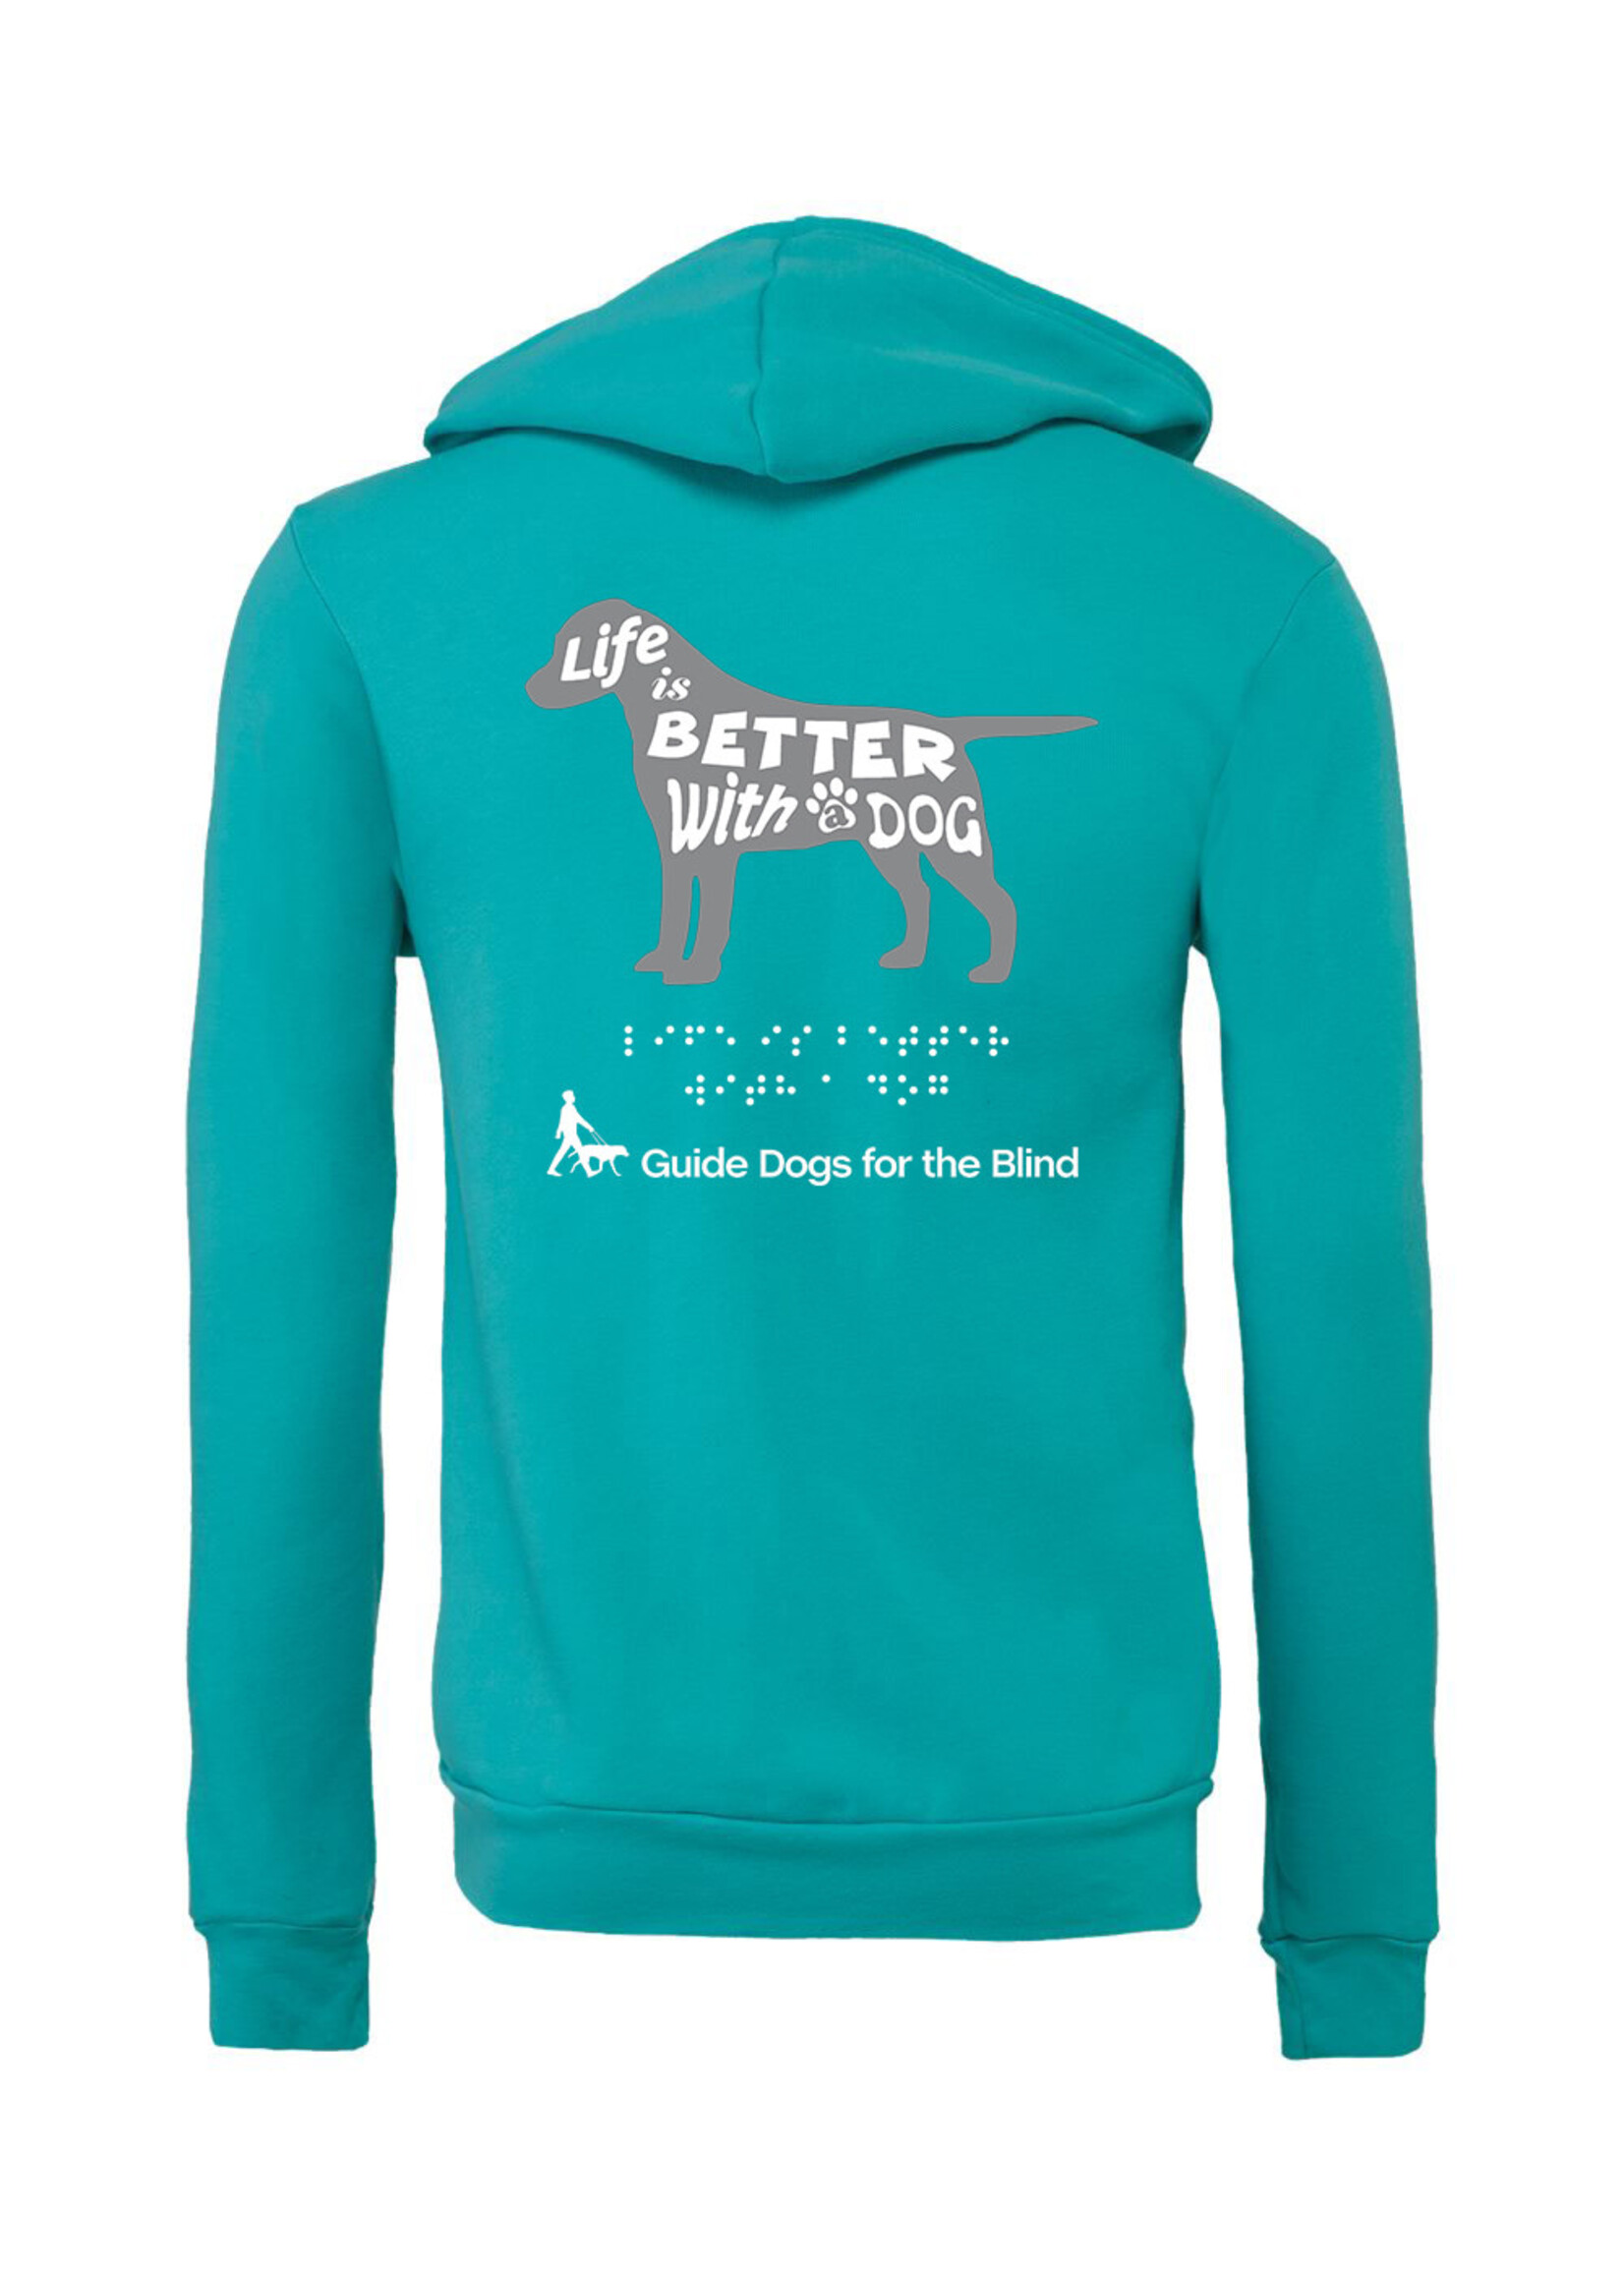 Relaxed Fit Life is Better with a dog Zip Hoodie